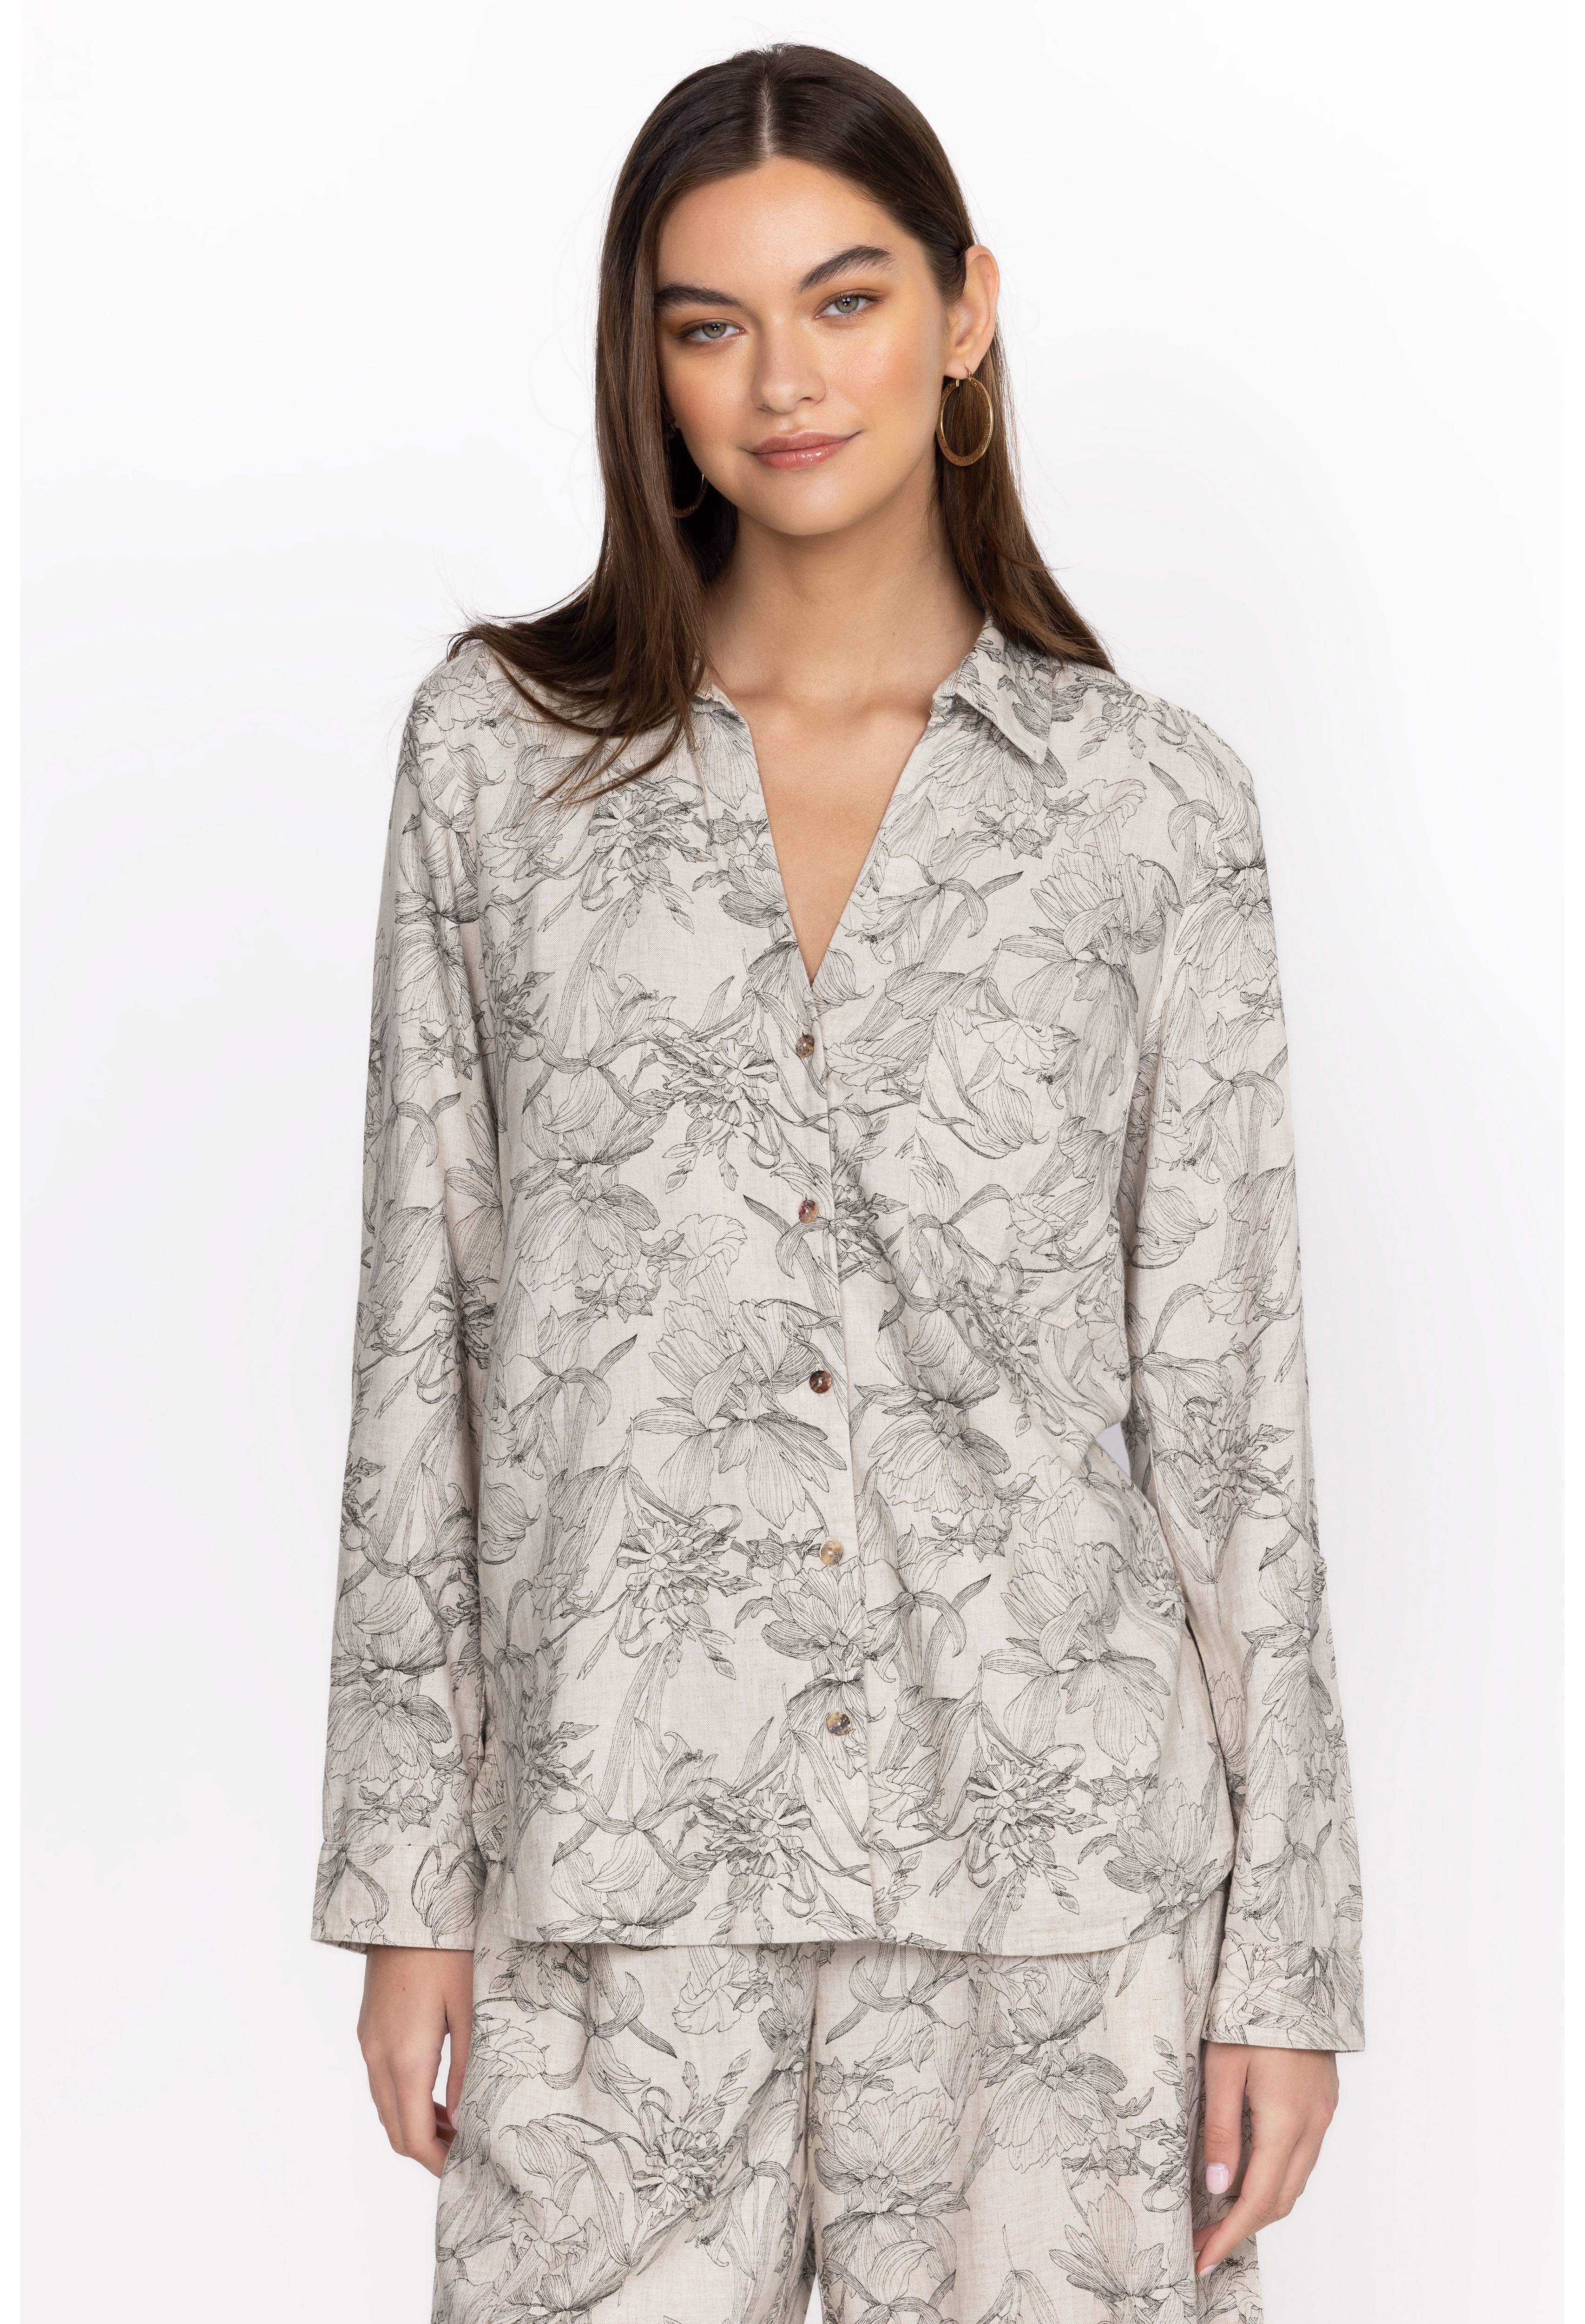 Etched Floral Relaxed Linen Shirt, , large image number 2